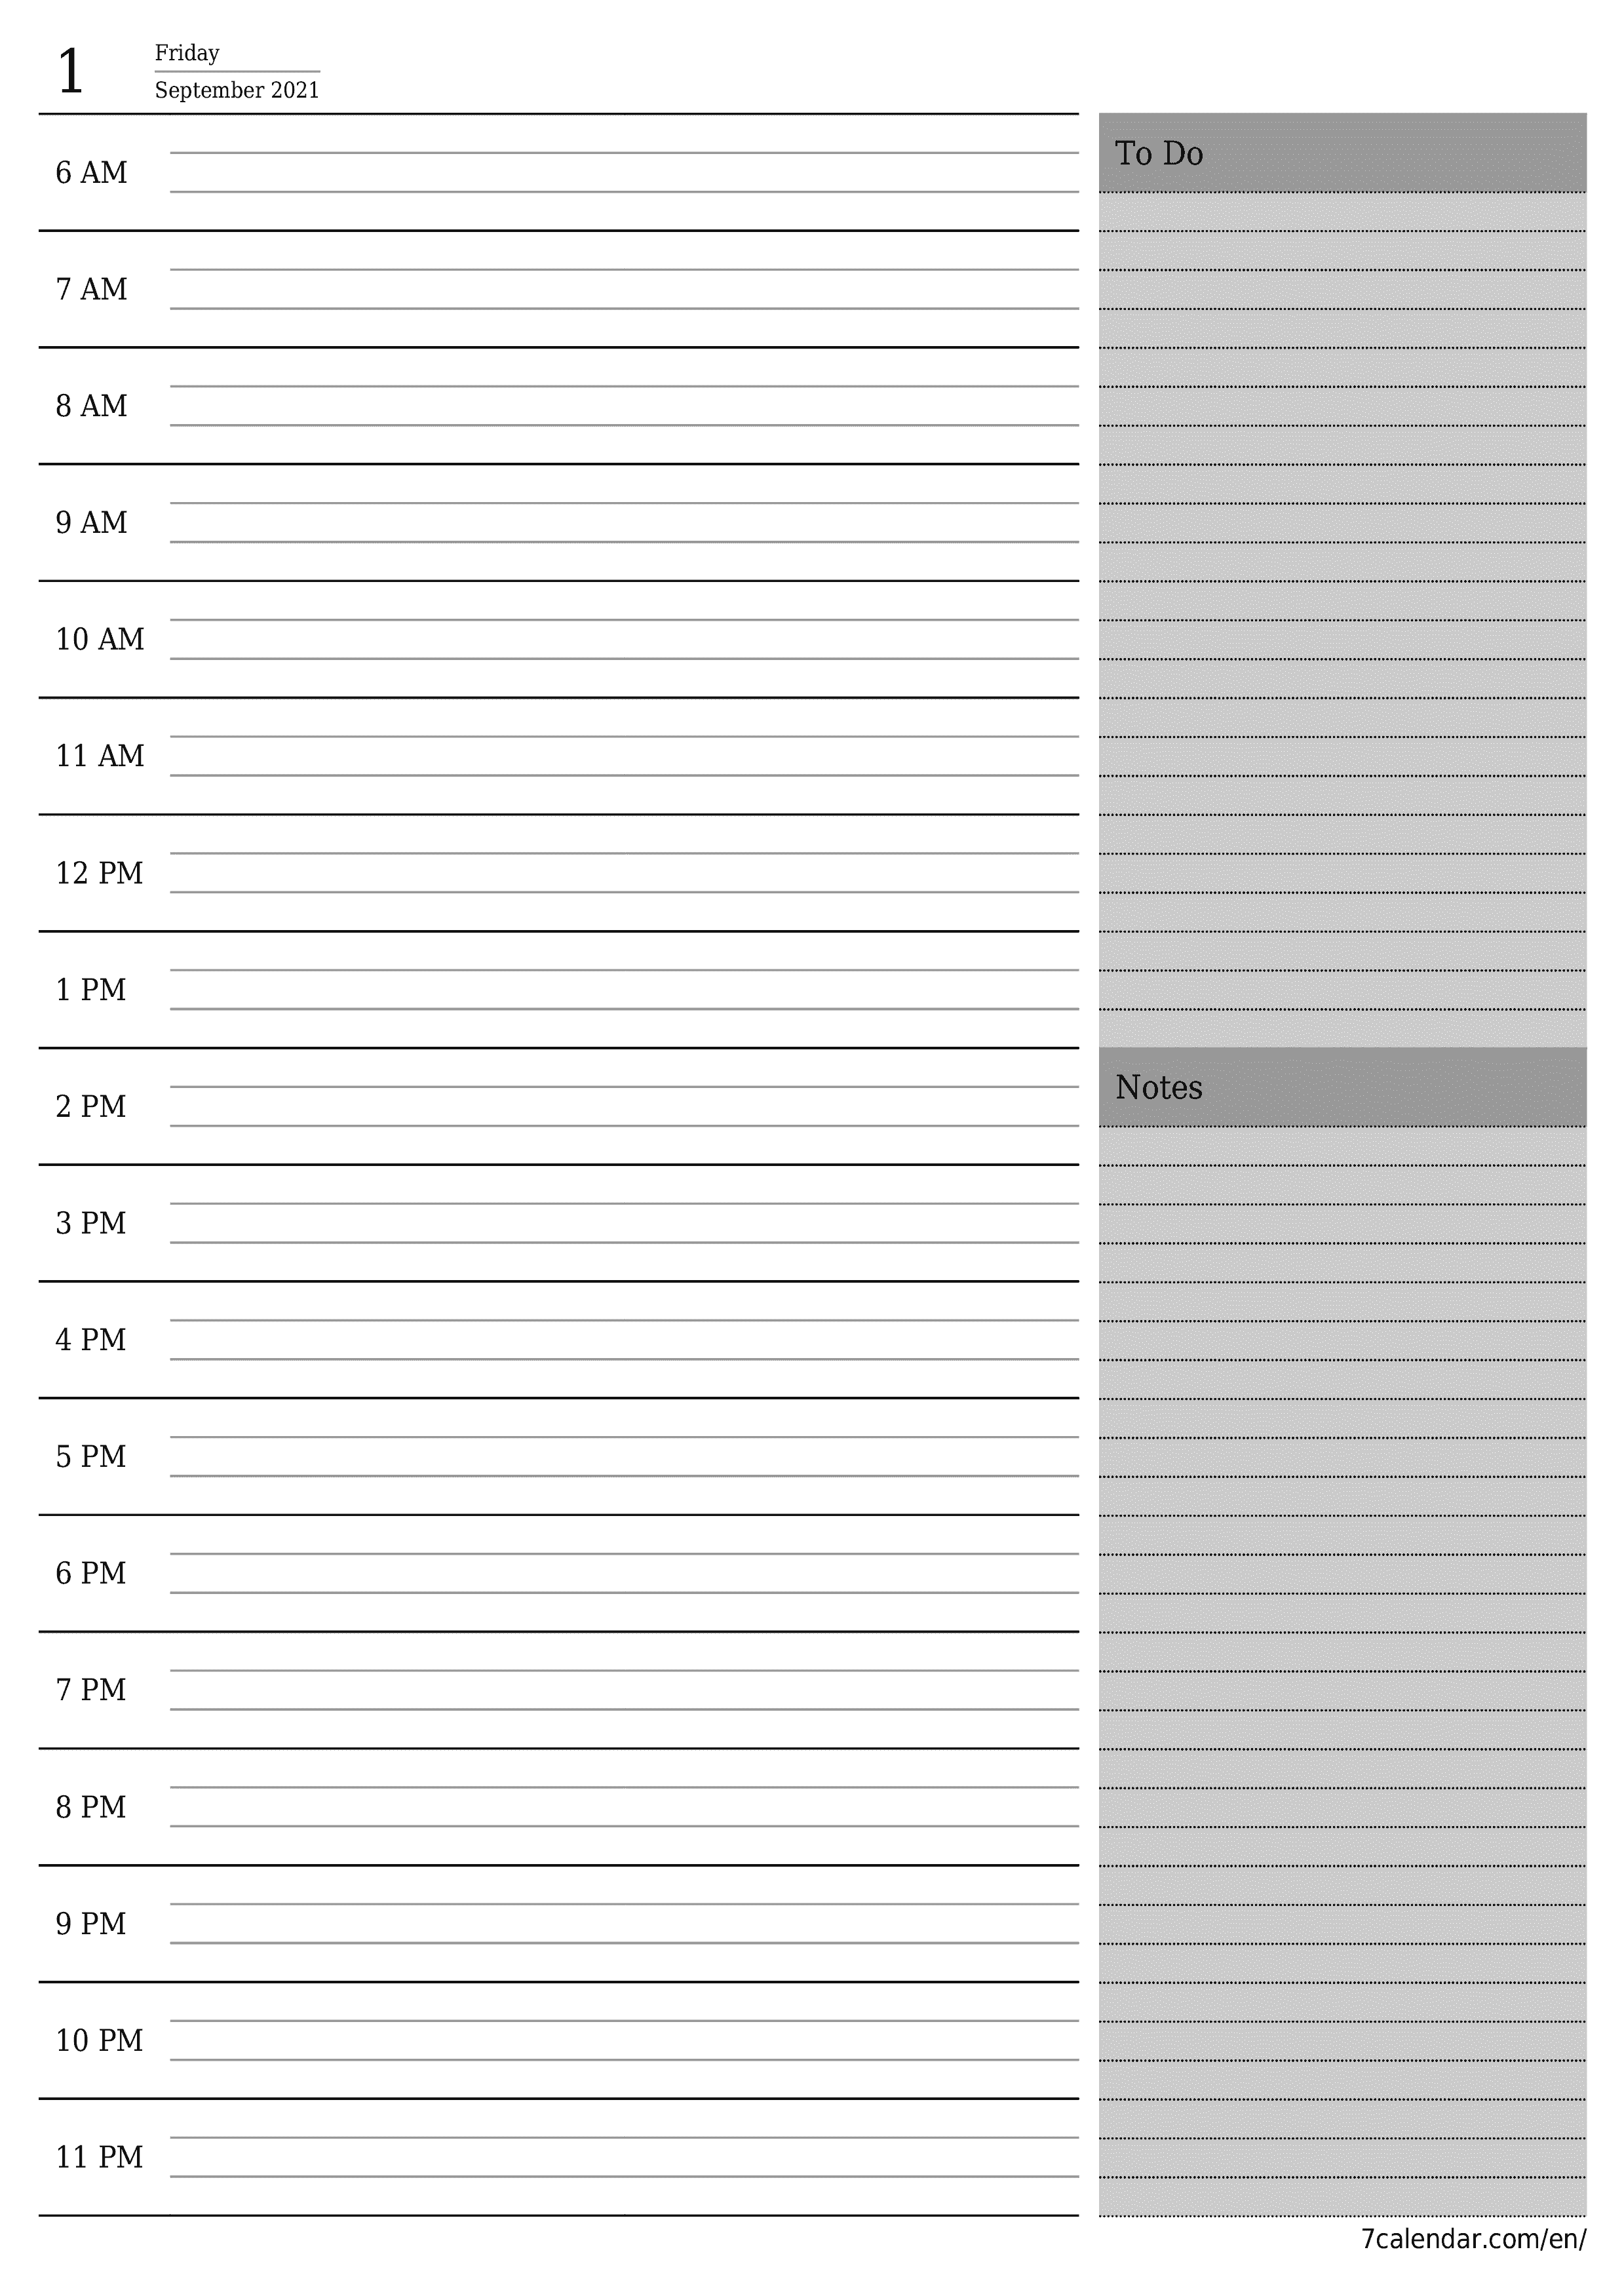 Blank daily printable calendar and planner for day September 2021 with notes, save and print to PDF PNG English